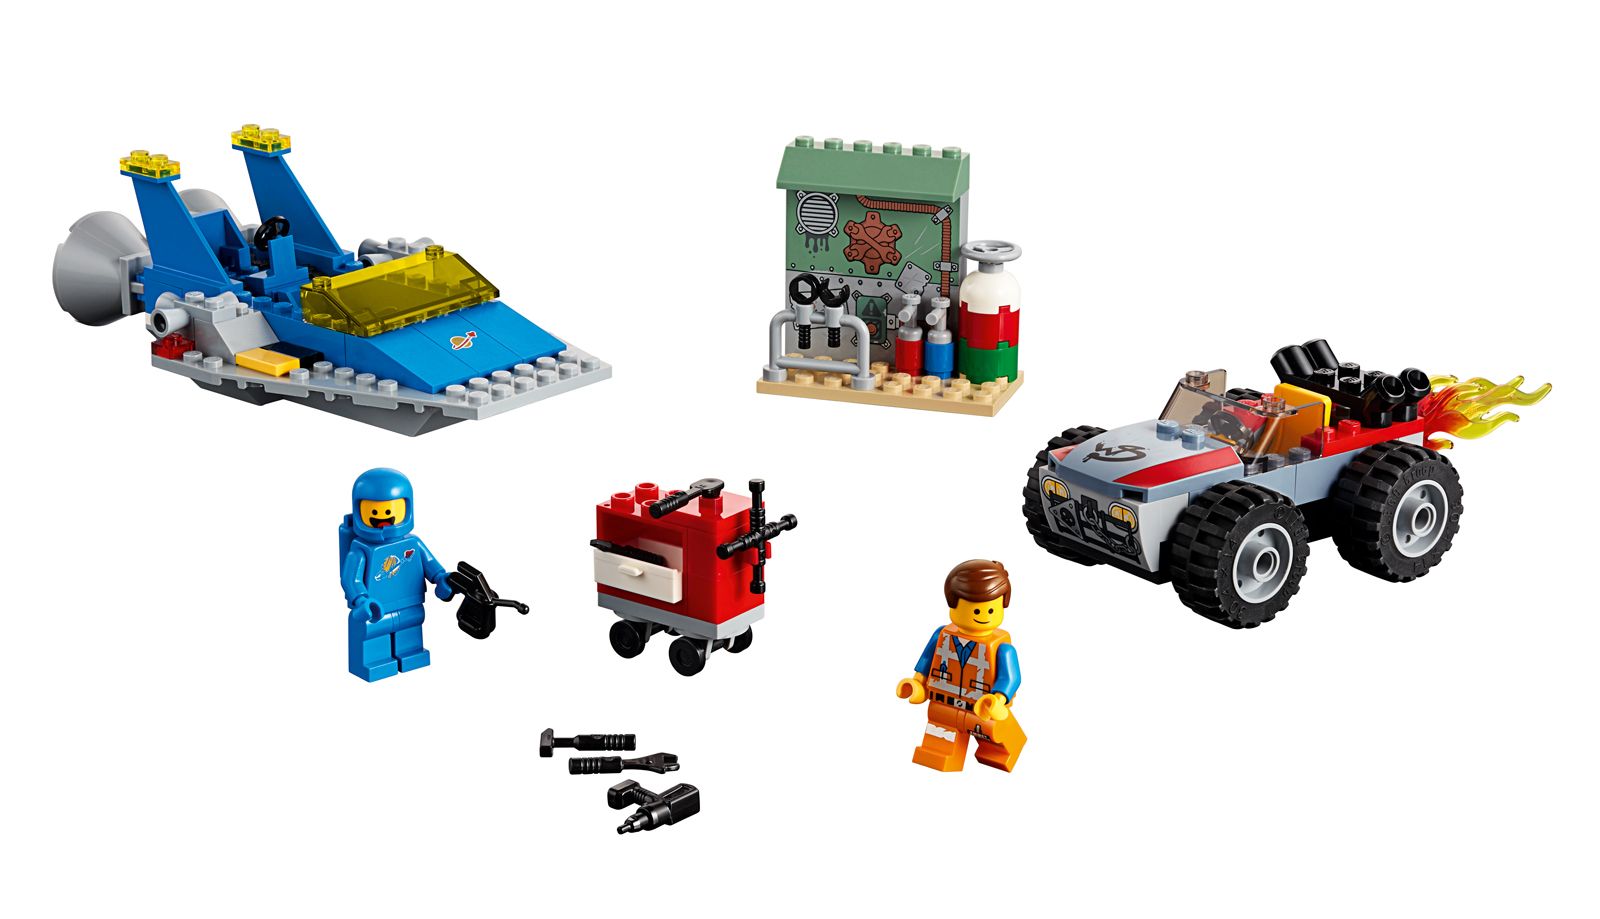 21 Lego sets from The Lego Movie 2 The Second Part - every set covered image 5